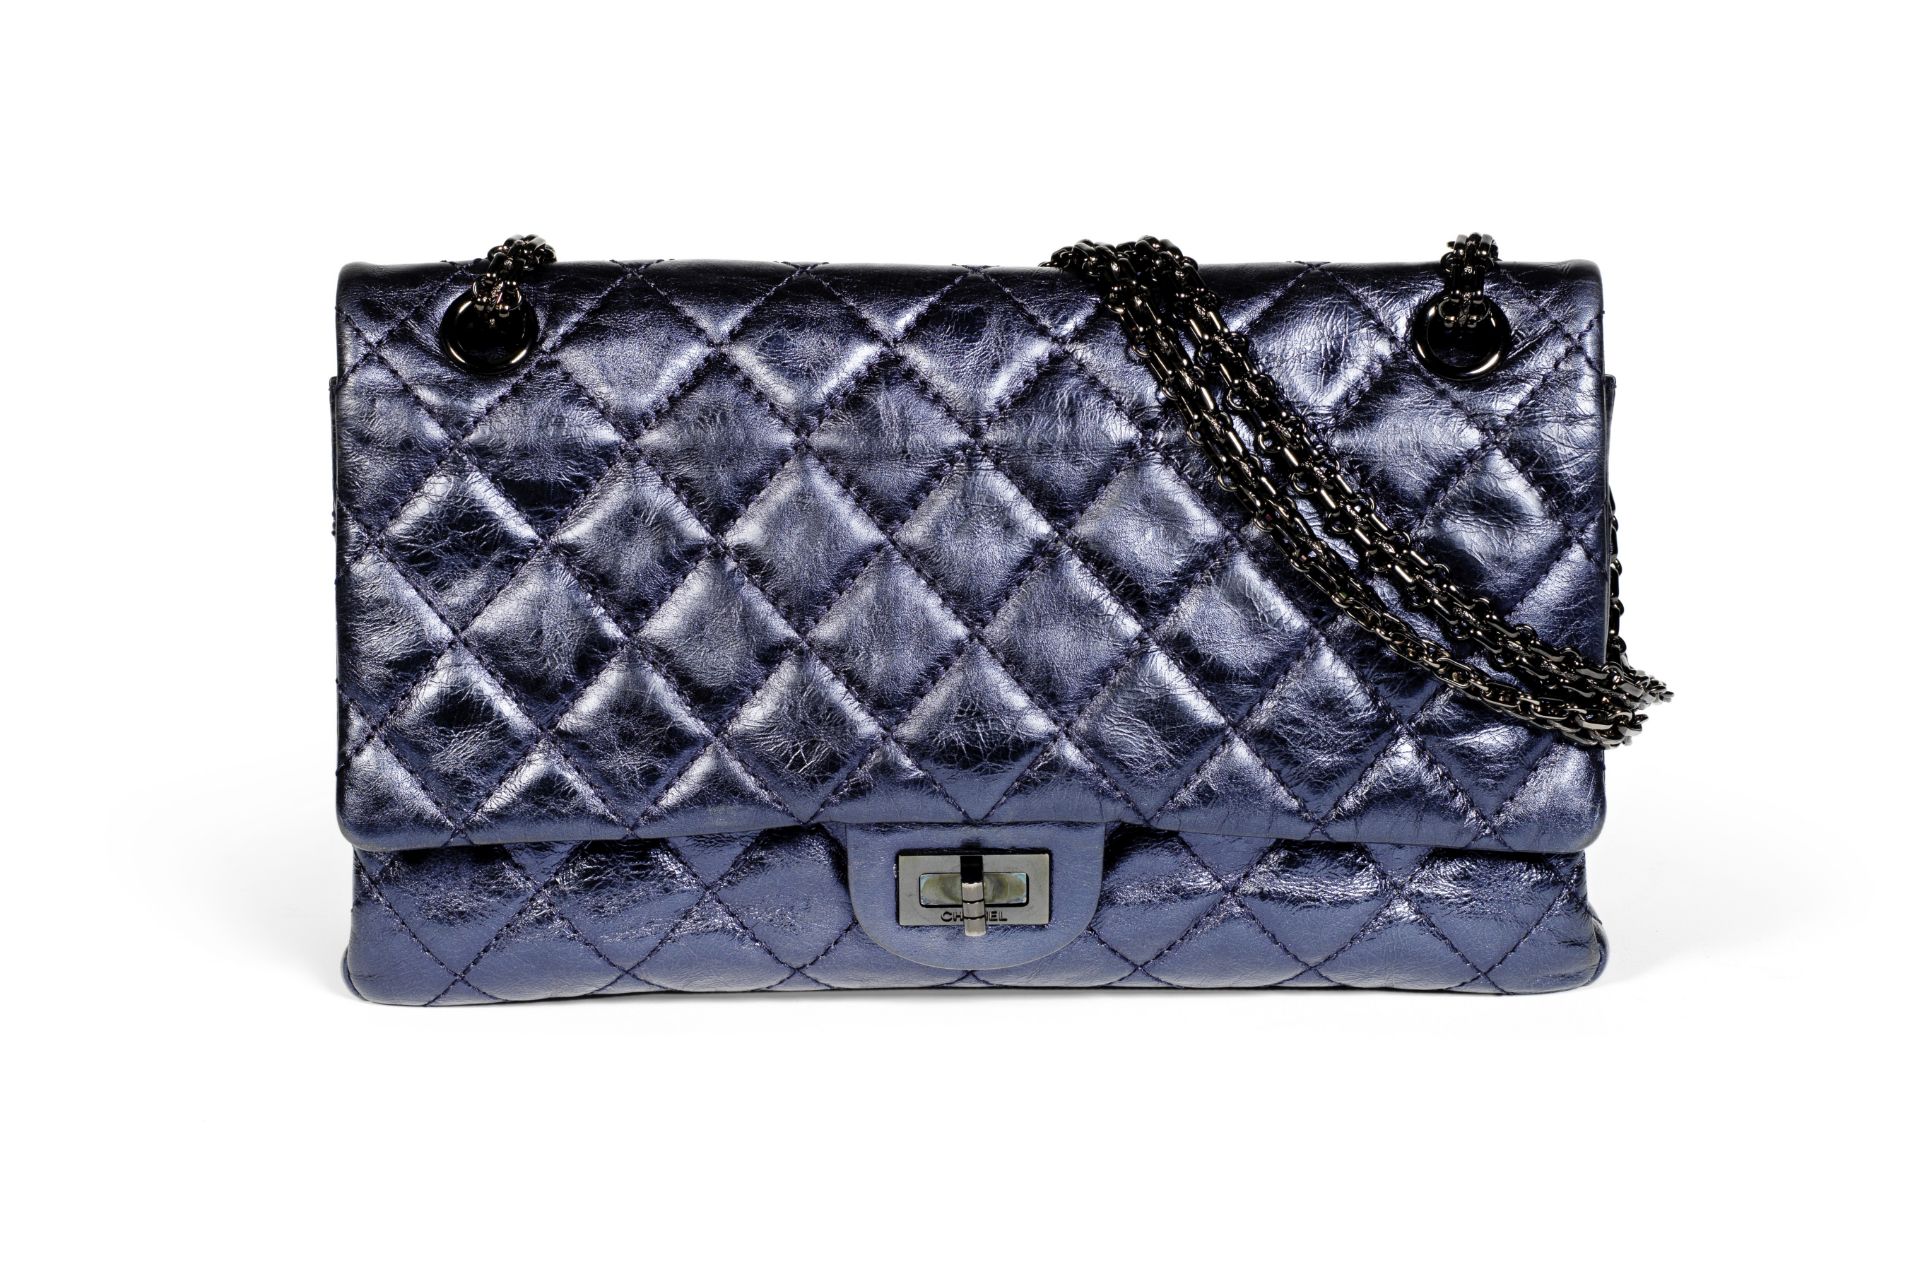 Metallic Blue Reissue 277 Double Flap Bag, Chanel, c. 2008-09, (Includes serial sticker and authe...